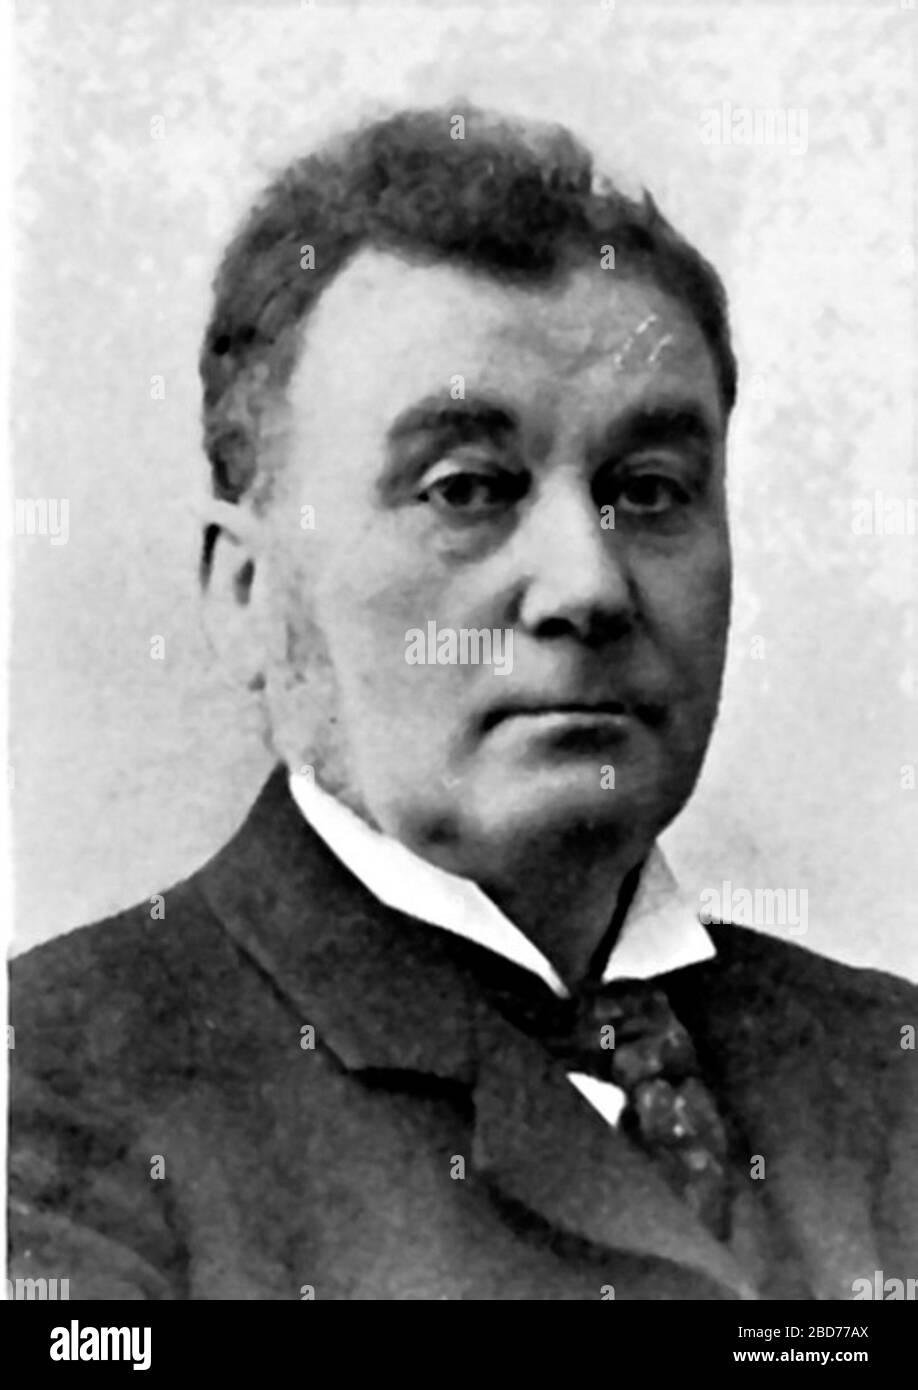 'English: Ola Thommessen (Olav/Olaf Anton Thommessen, 1851–1942), Norwegian journalist and editor. Editor of newspaper Verdens Gang.; 11 September 2011; S. Blom (ed.): Den Kongelige Norske St. Olavs Orden, A. M. Hanches Forlag, 1934.; Photographer not named.     Public domainPublic domainfalsefalse      This image is in the public domain in Norway because the Norwegian Copyright law (§43a) specifies that images not considered to be works of art become public domain 50 years after creation, provided that more than 15 years have passed since the photographer's death or the photographer is unknow Stock Photo